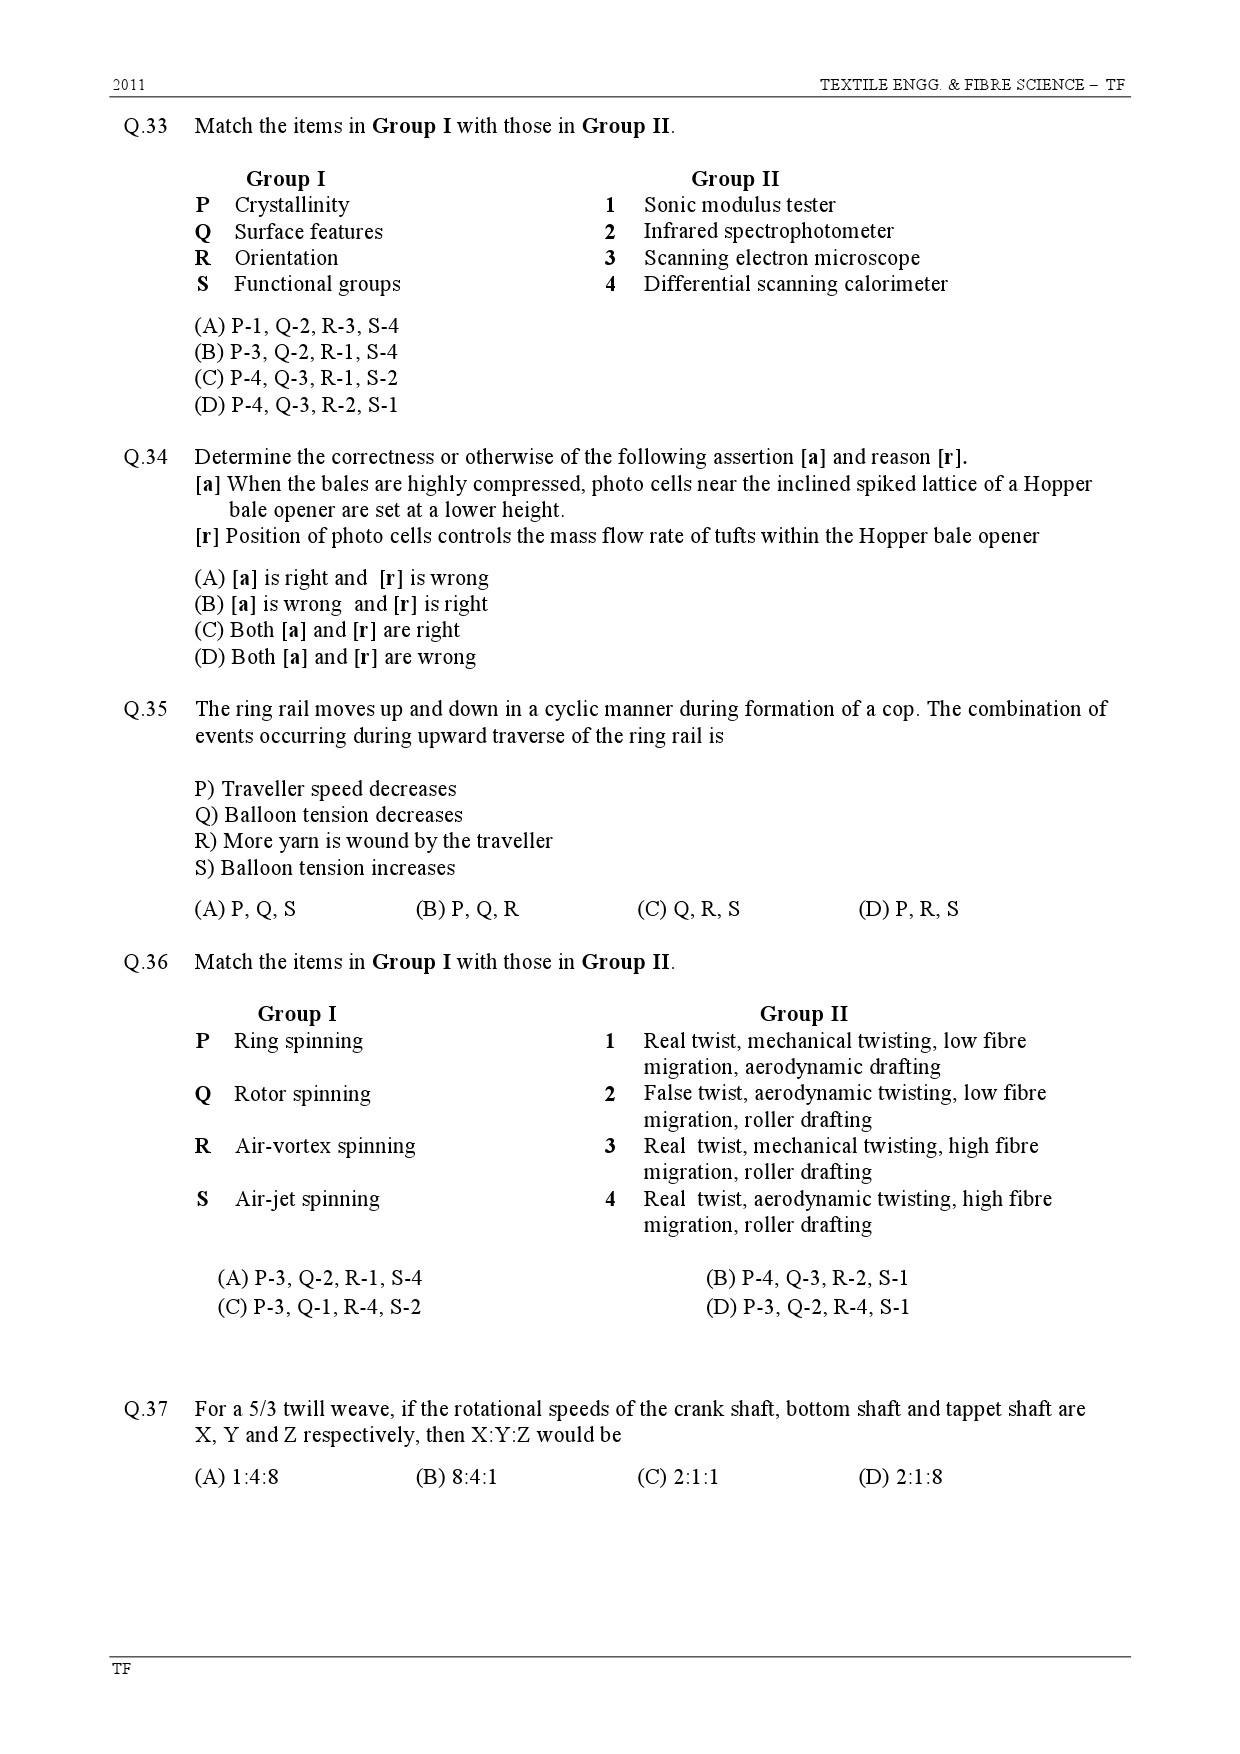 GATE Exam Question Paper 2011 Textile Engineering and Fibre Science 6